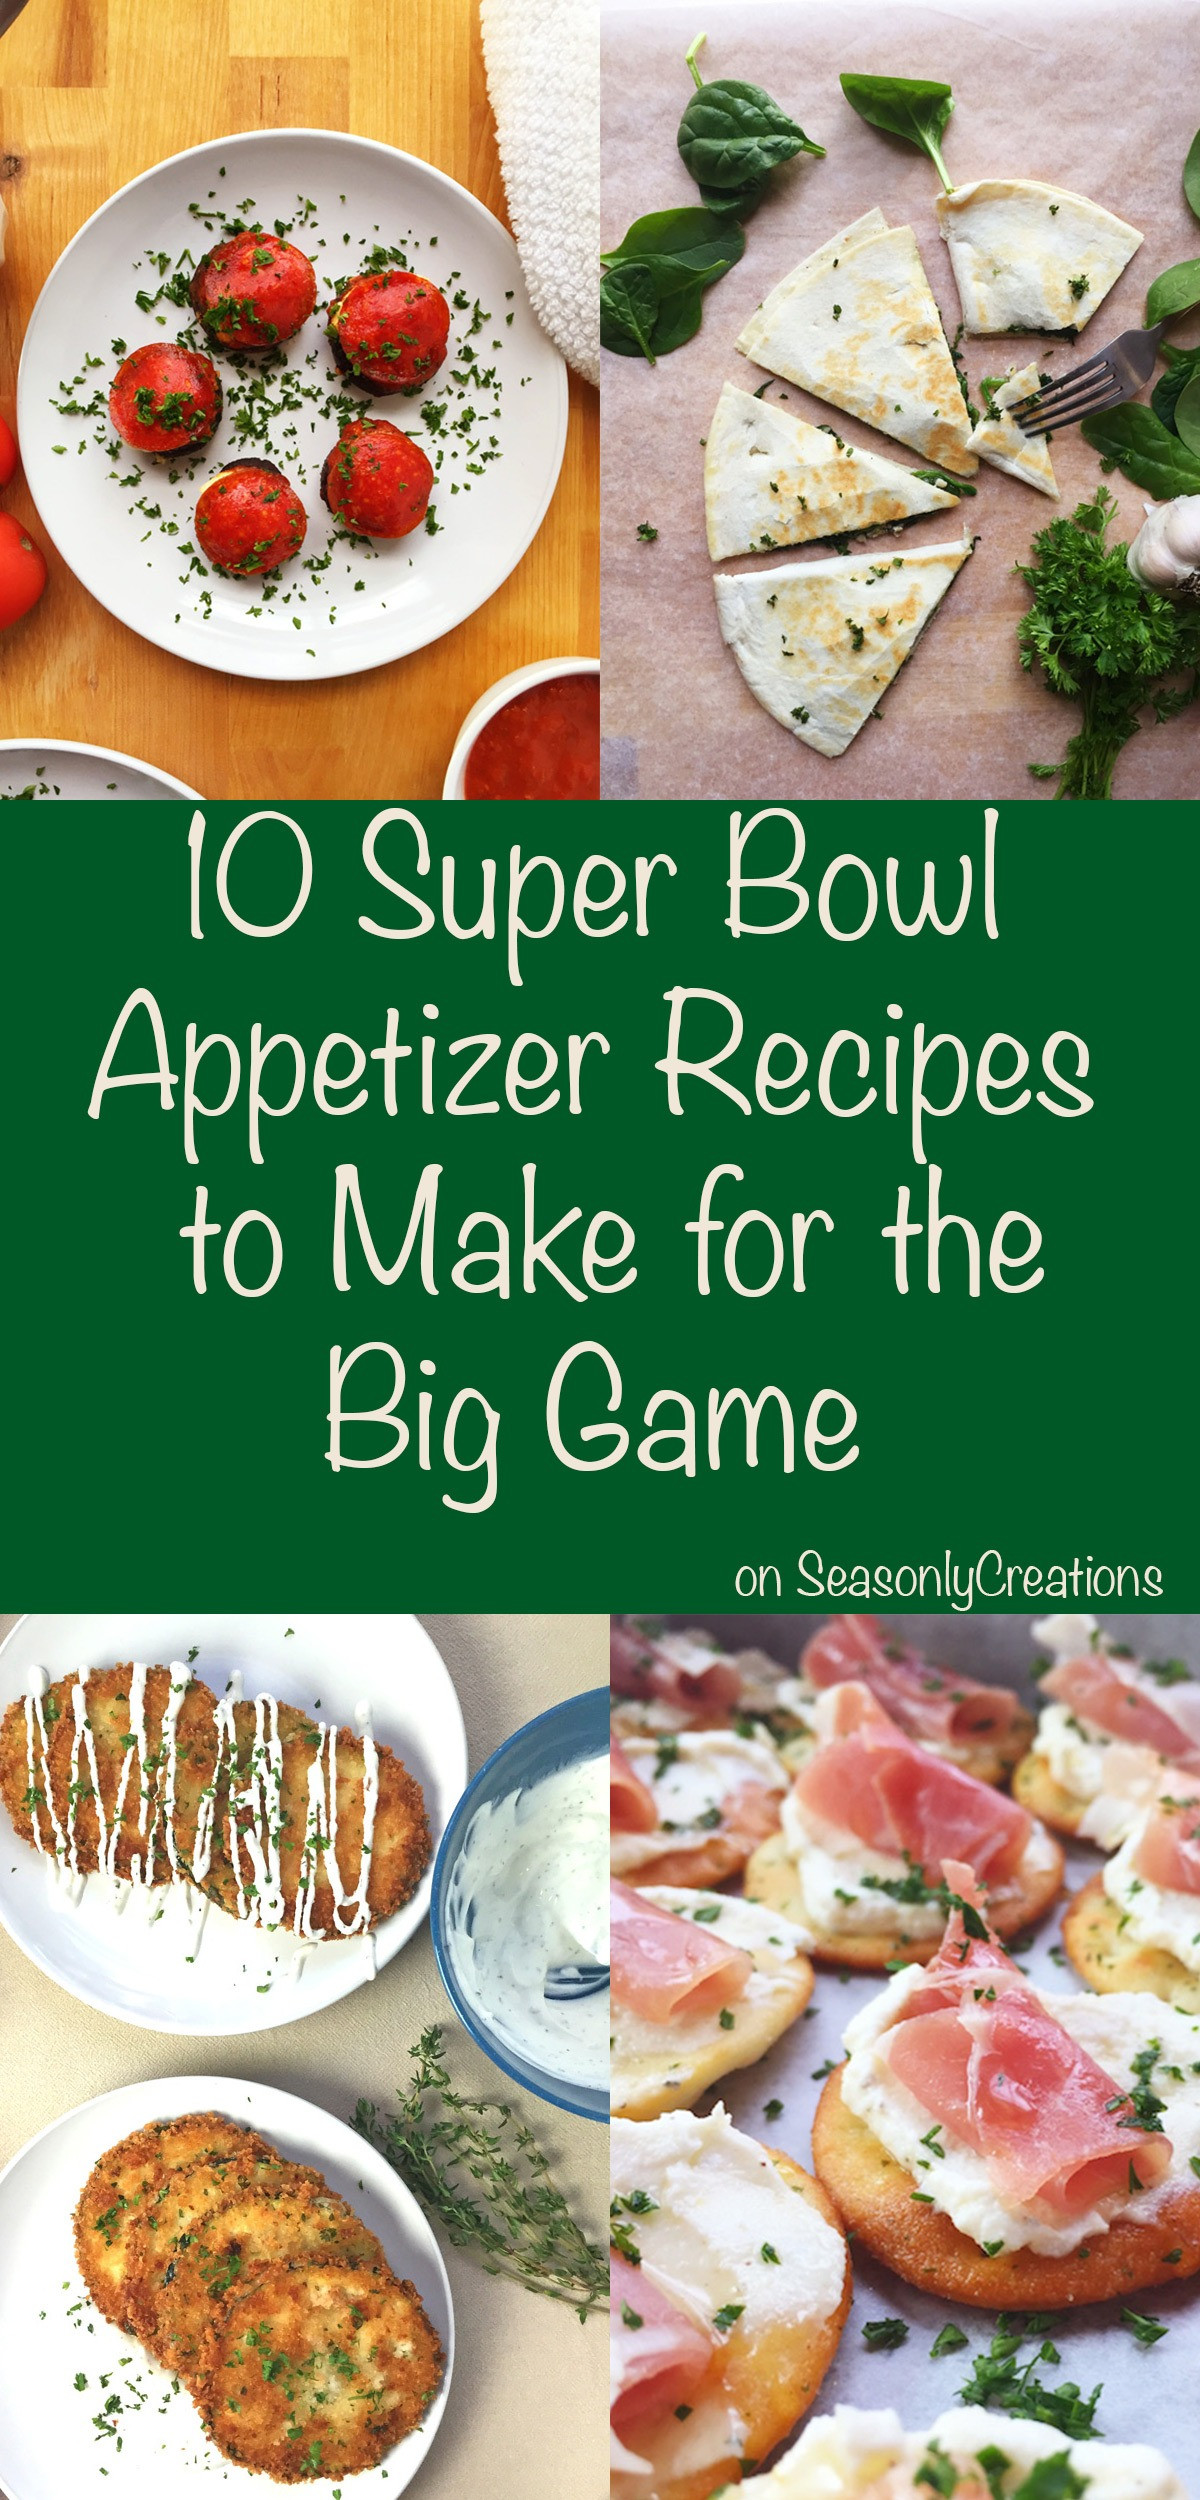 Super Bowl Party Appetizer Recipes
 10 Super Bowl Appetizer Recipes to Make for the Big Game